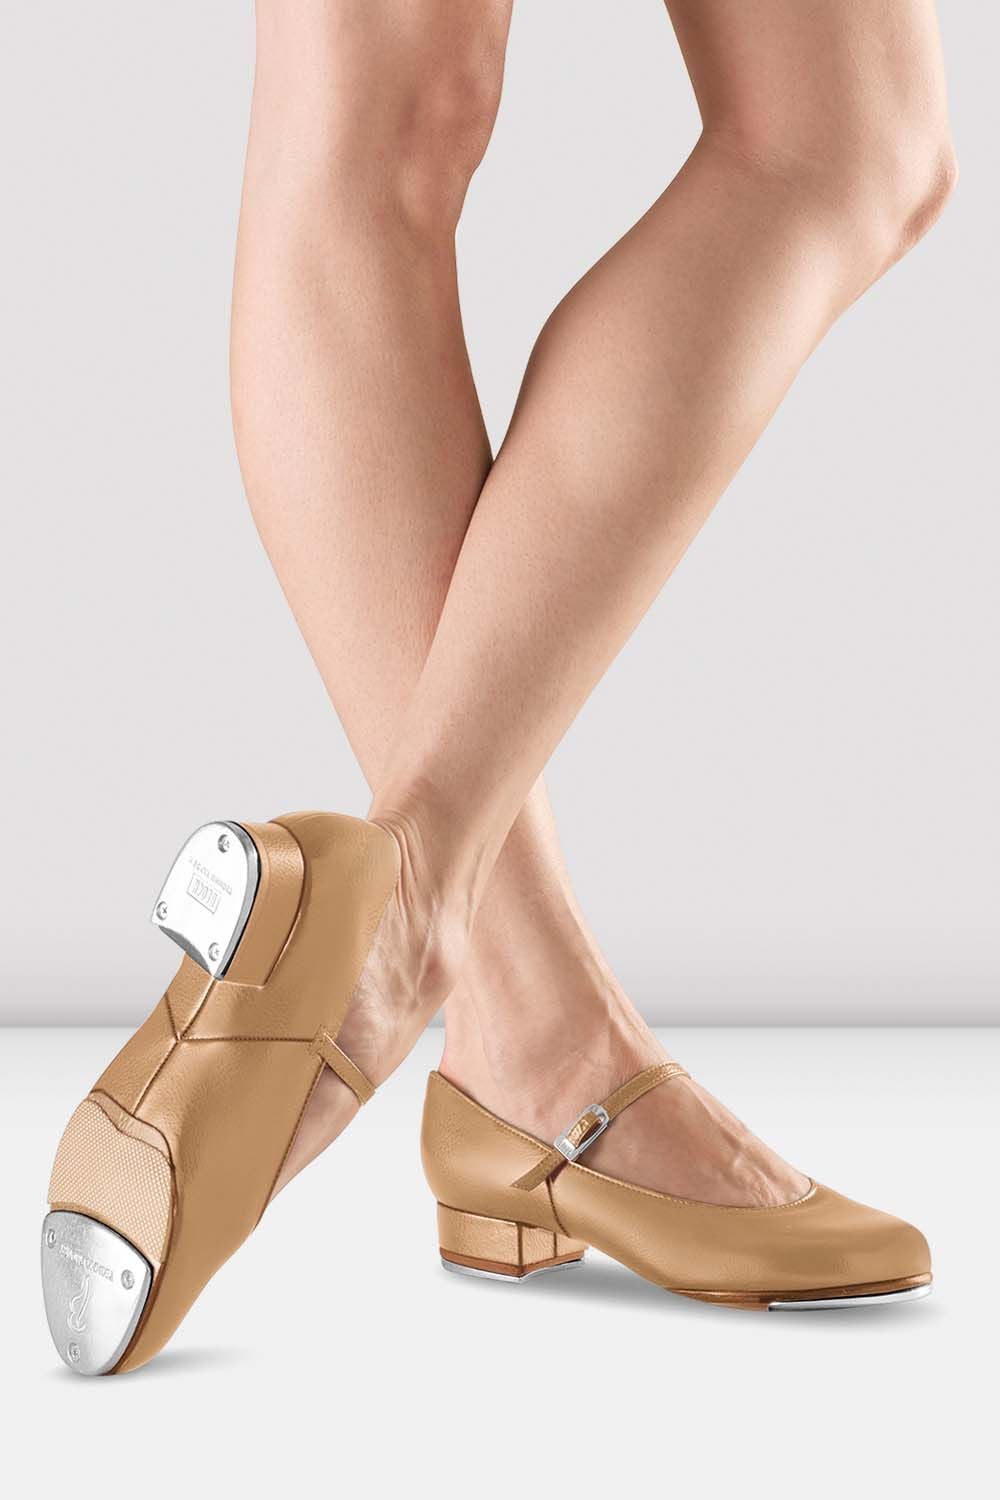 BLOCH Ladies Kelly Tap Shoes, Tan Synthetic Leather